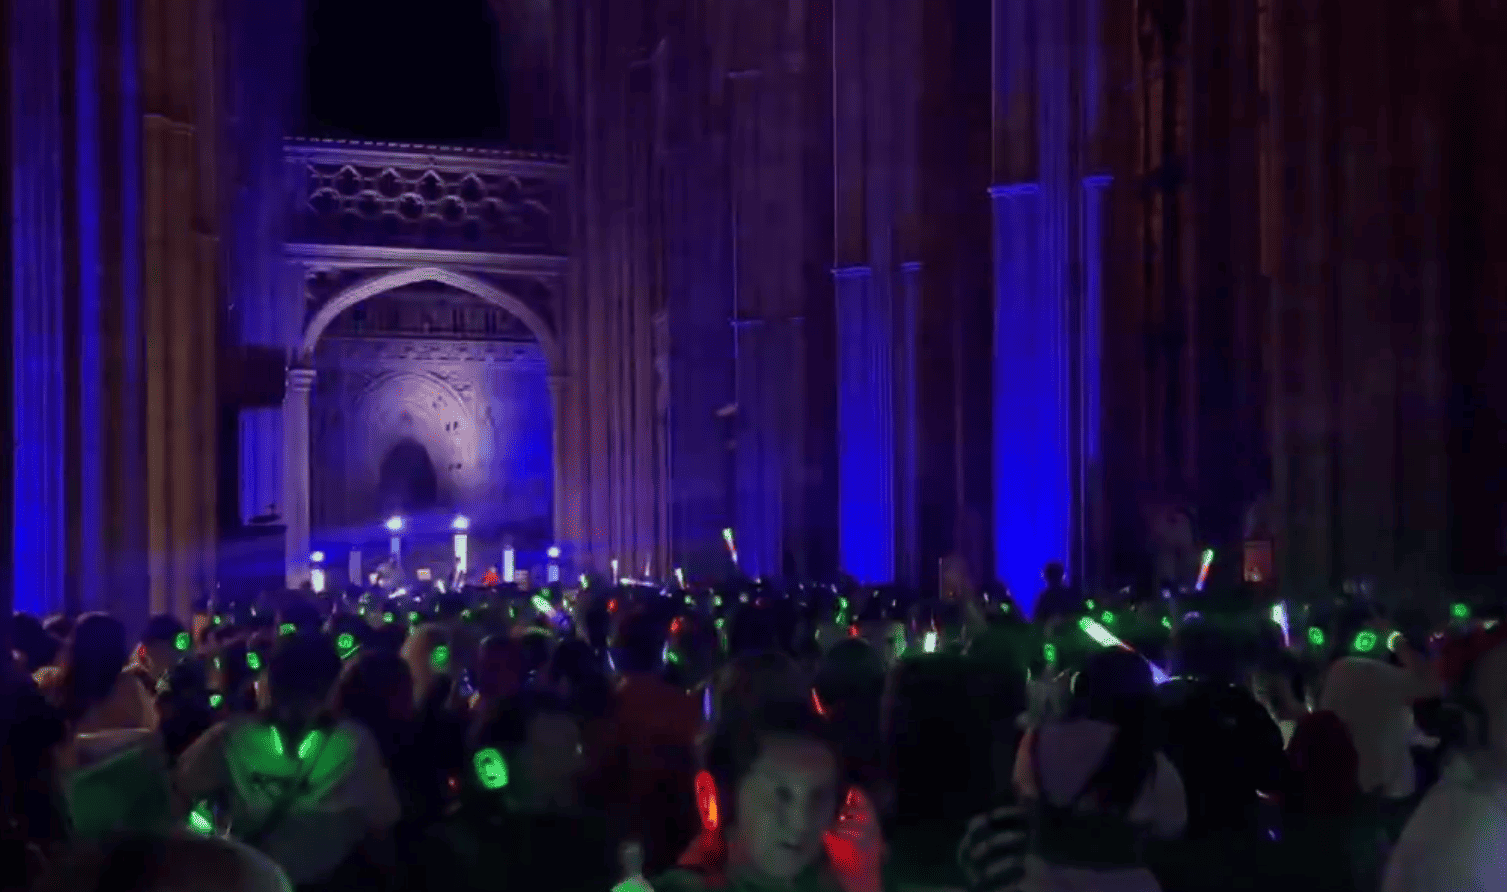 A Disco taking place in a Cathedral